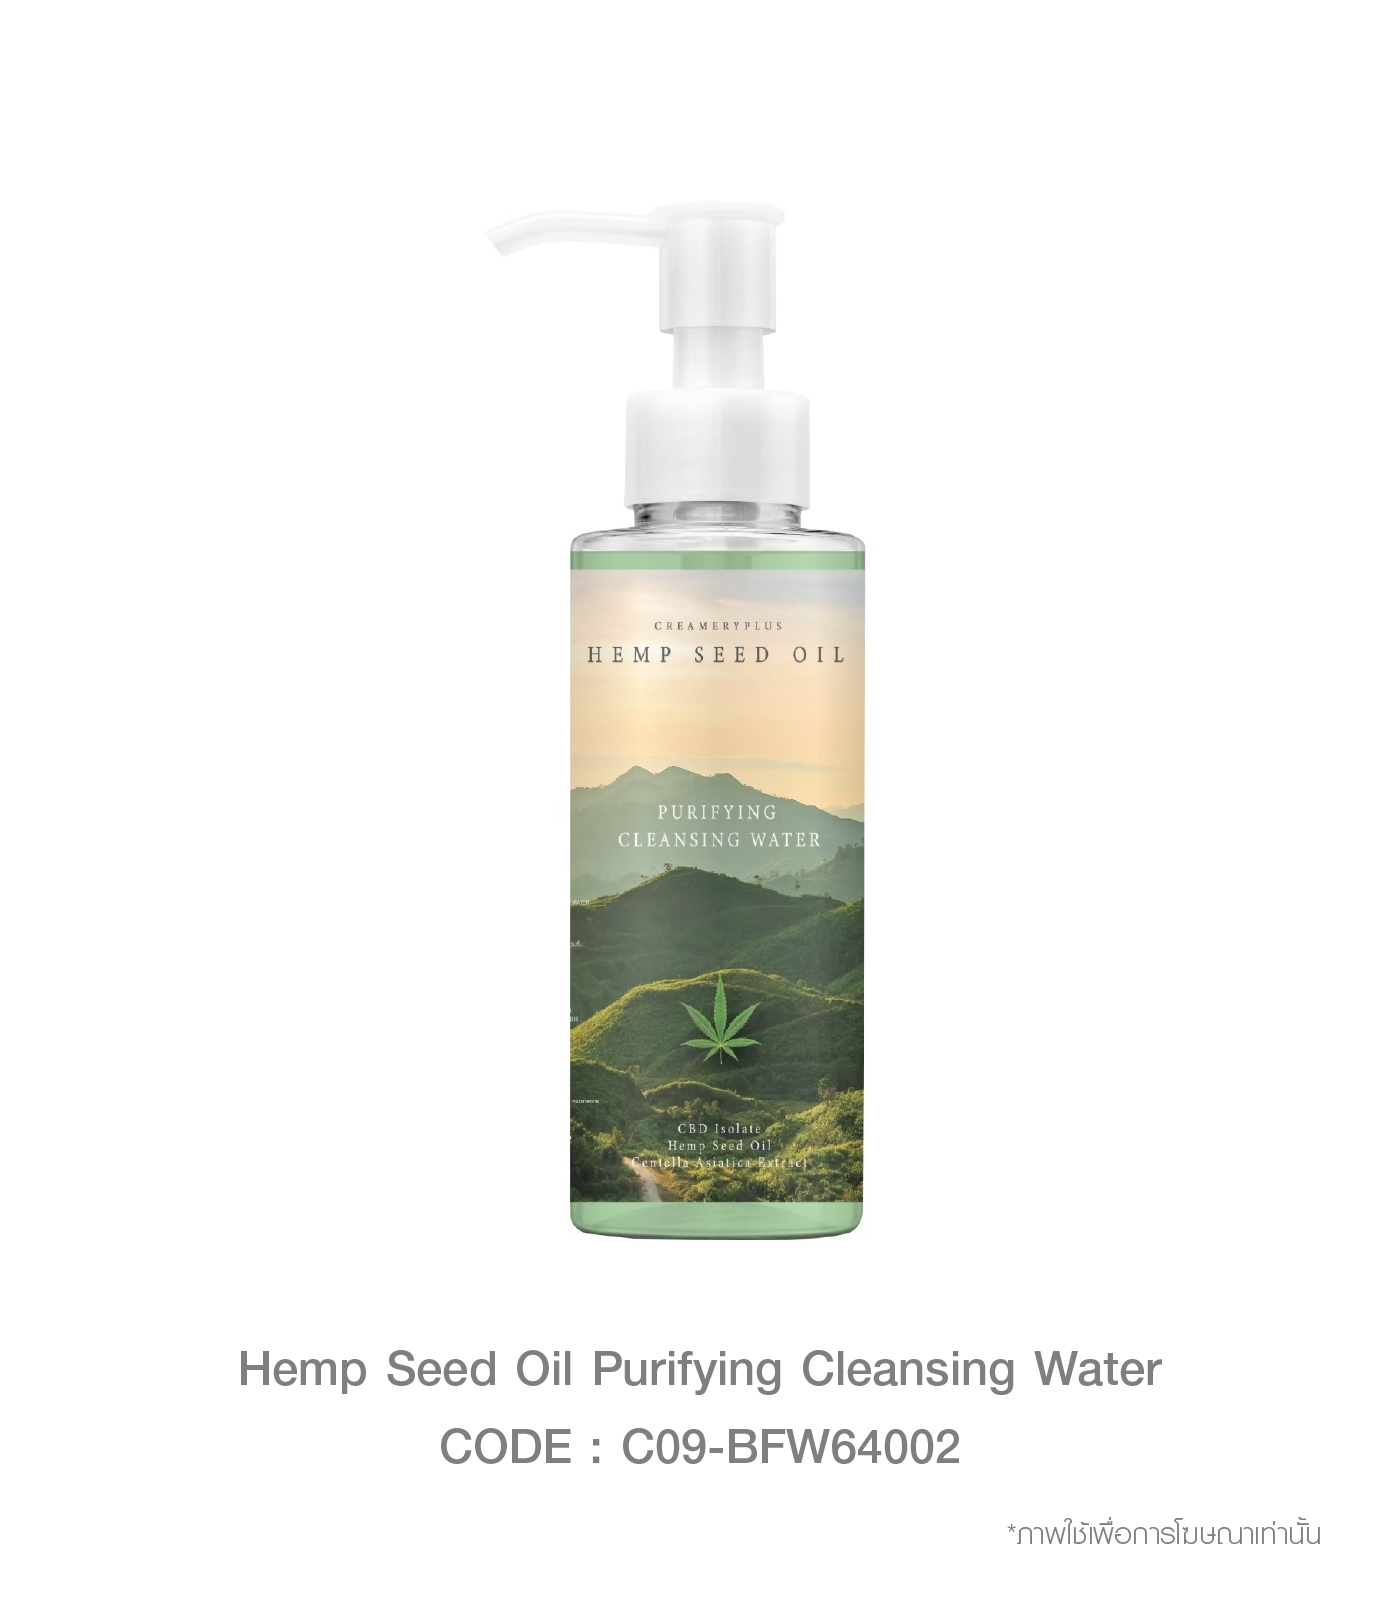 Hemp Seed Oil Purifying Cleansing Water